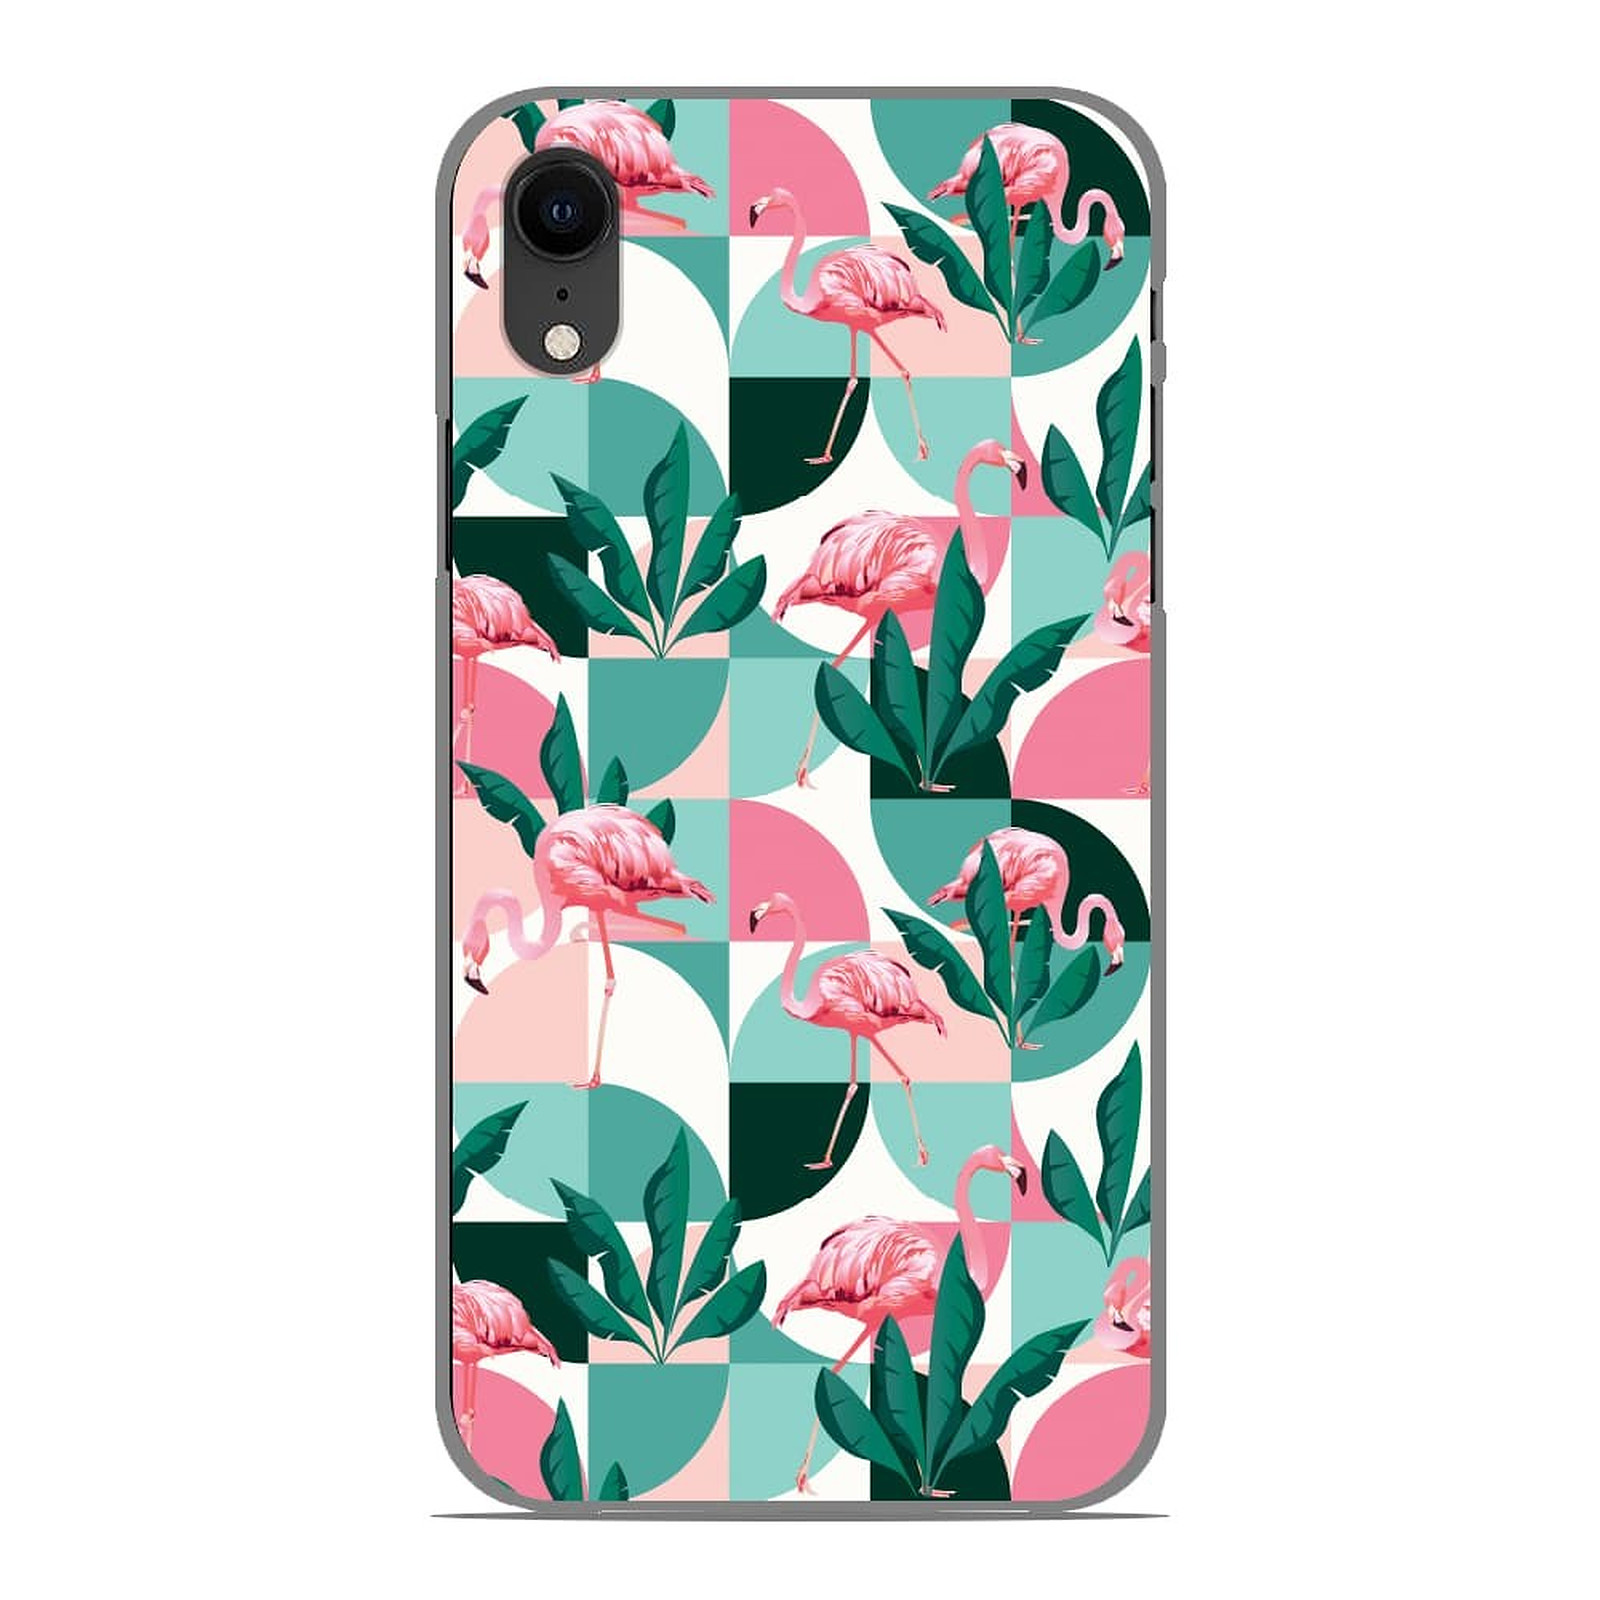 1001 Coques Coque silicone gel Apple iPhone XR motif Flamants Roses ge´ome´trique - Coque telephone 1001Coques